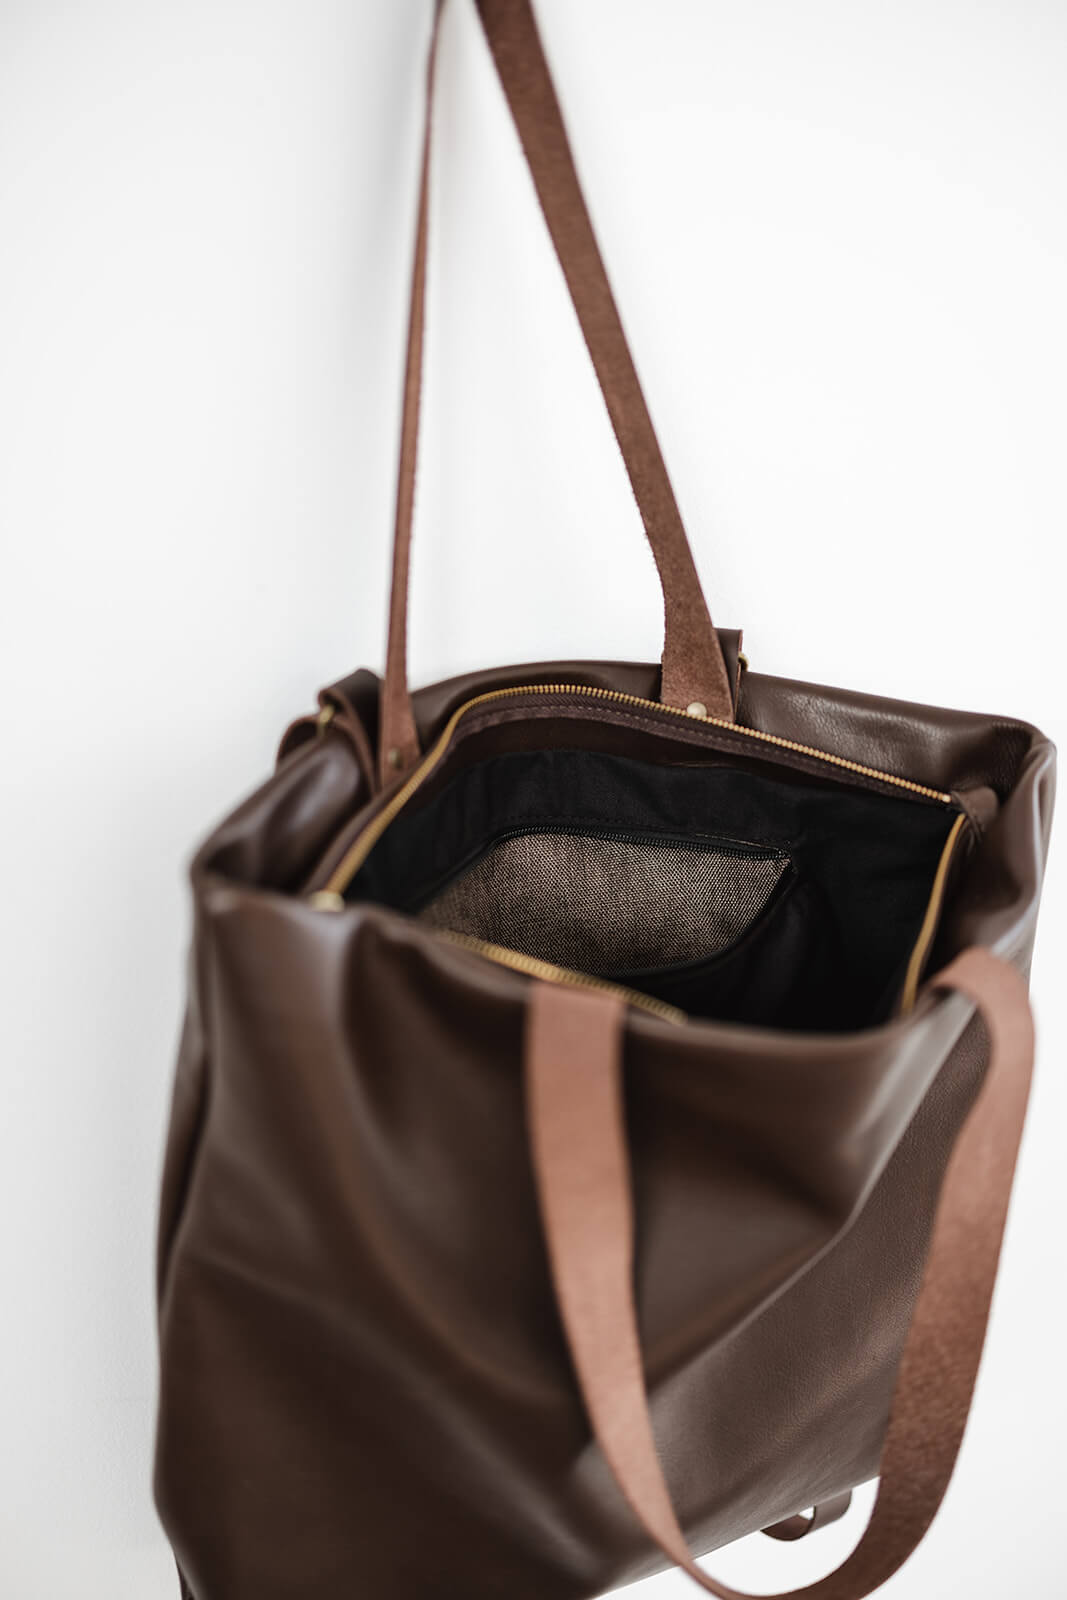 Product pic of the Ella Jackson Chocolate Brown Leather Backpack & Tote. The bag is hanging as a tote on a white background. The brown and gold zip is undone to reveal the black lining and black and white fabric of the internal pocket